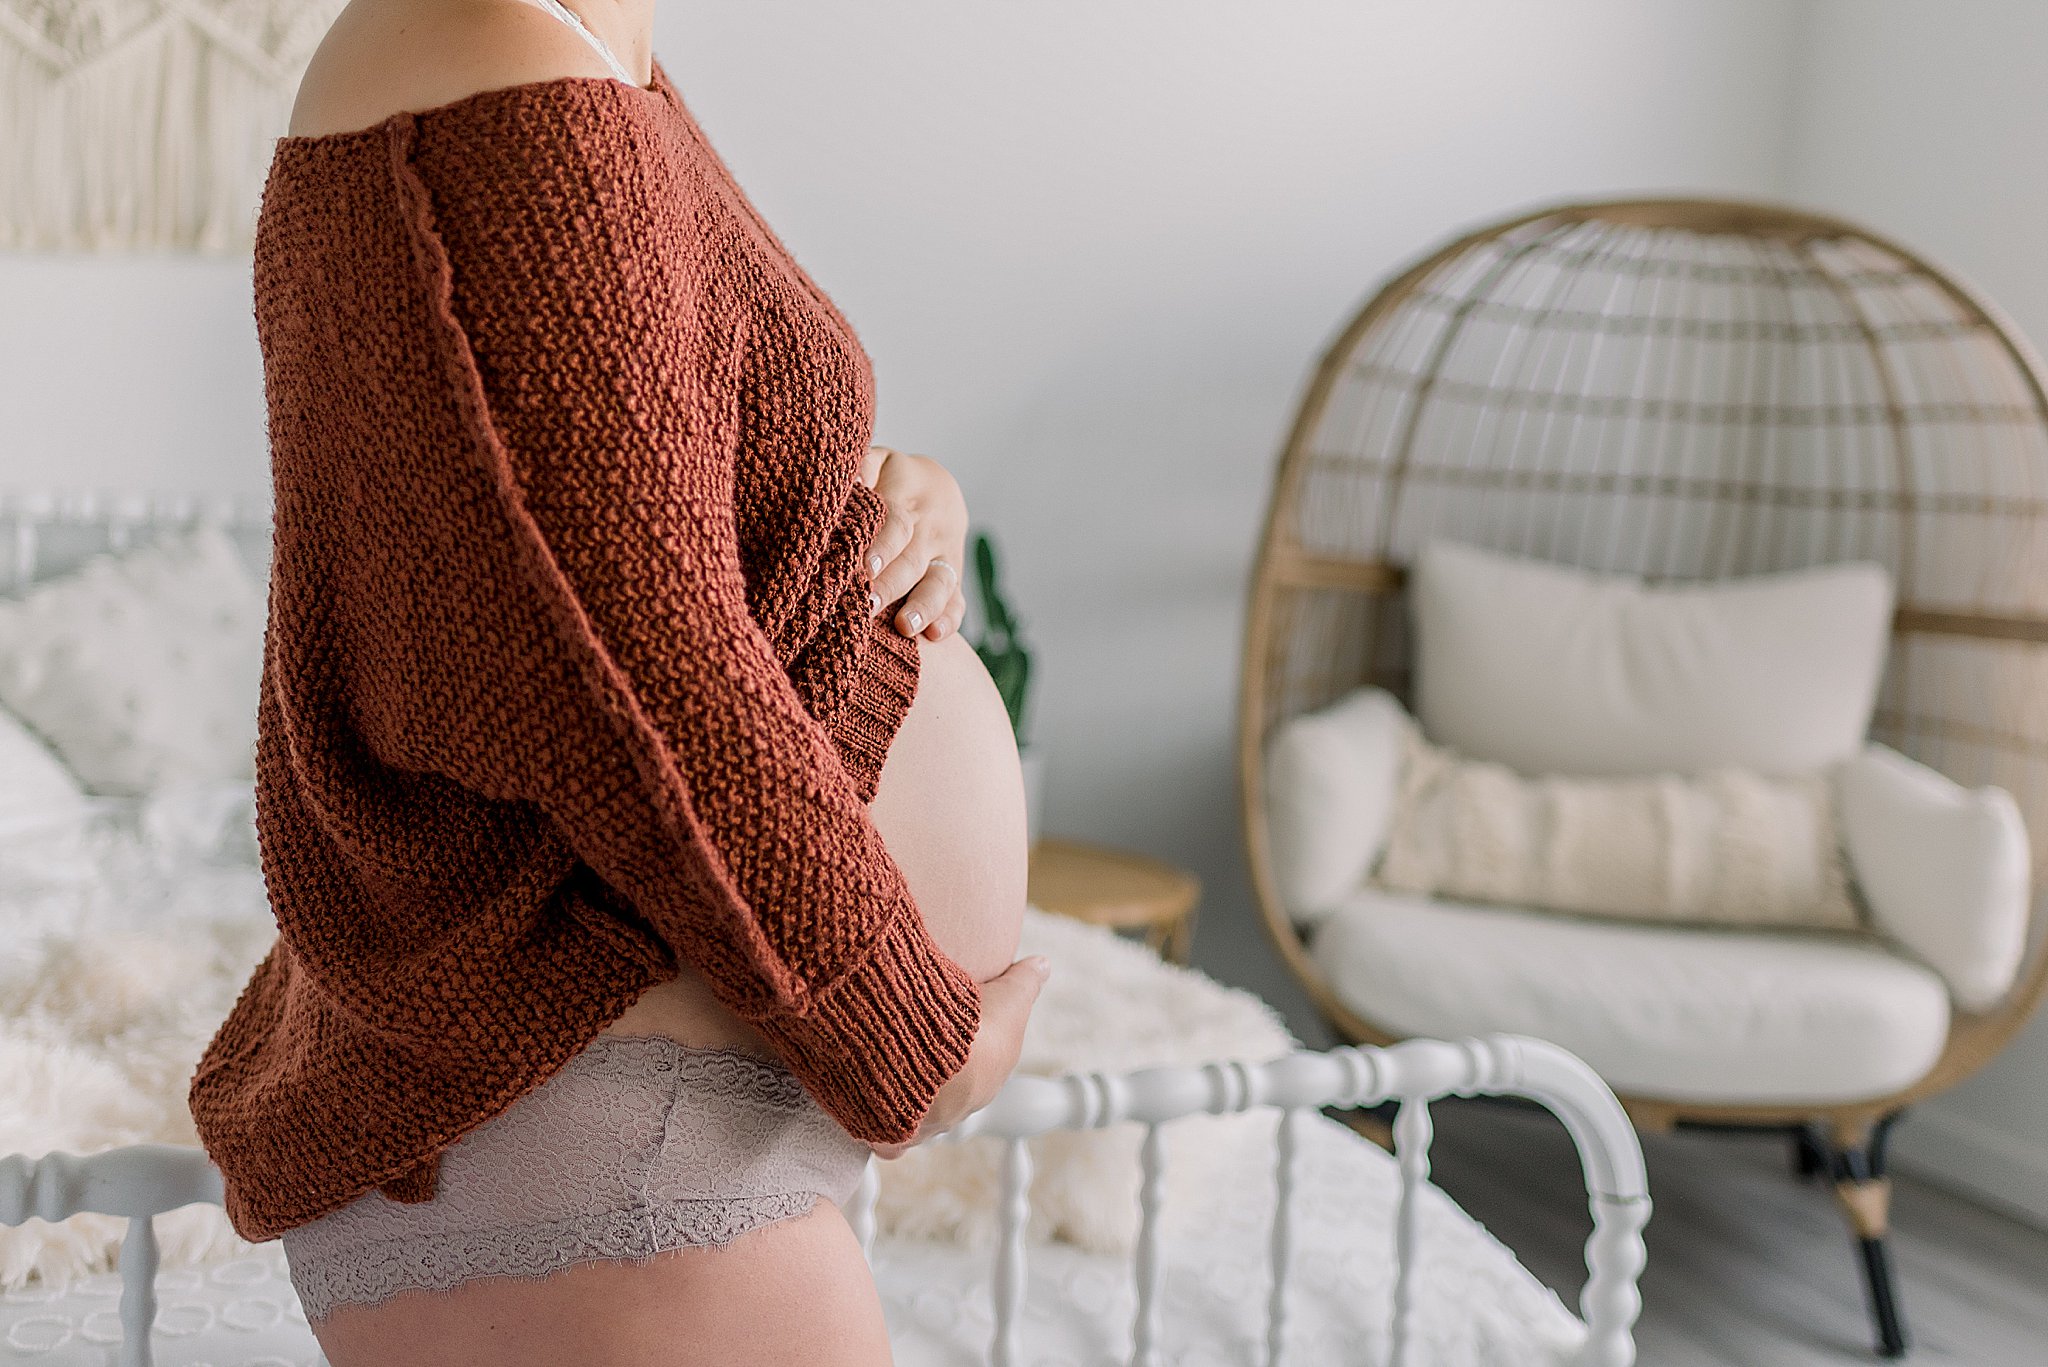 Cozy Maternity Session